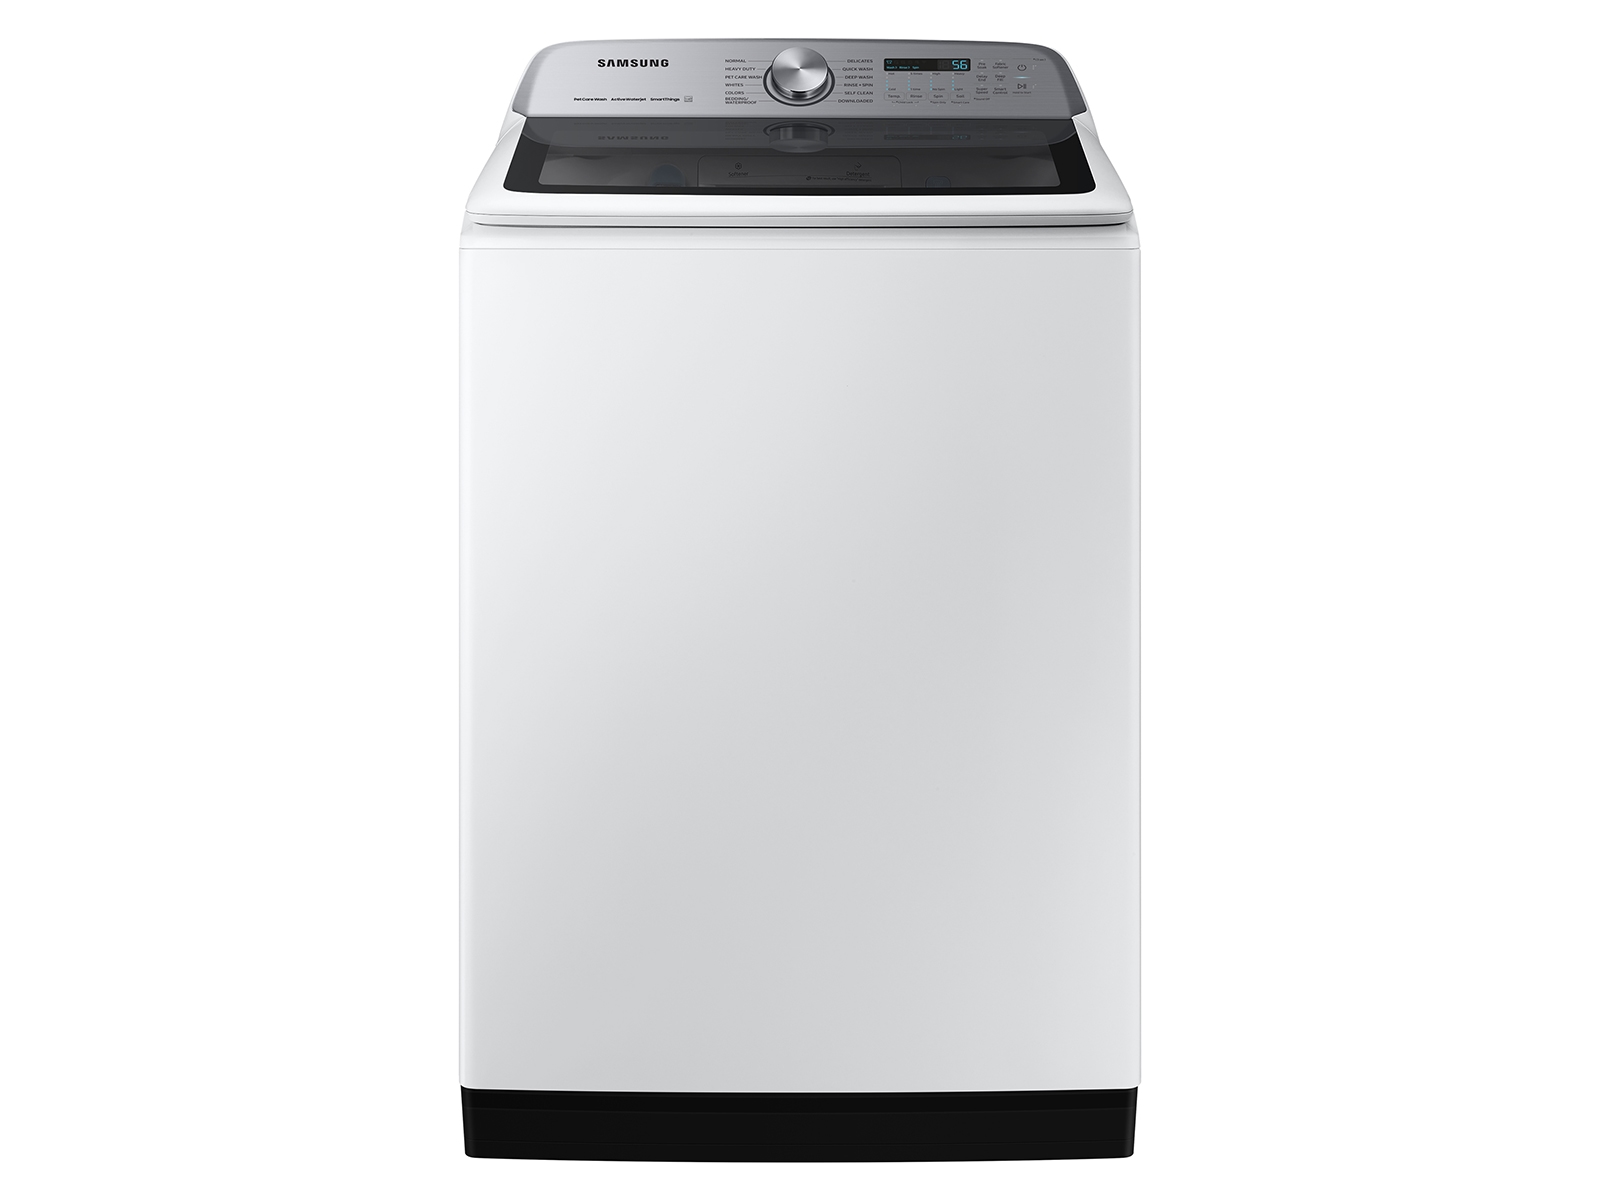 Samsung 5.4 cu. ft. Smart Top Load Washer with Pet Care Solution and Super Speed Wash in White(WA54CG7150AWA4)